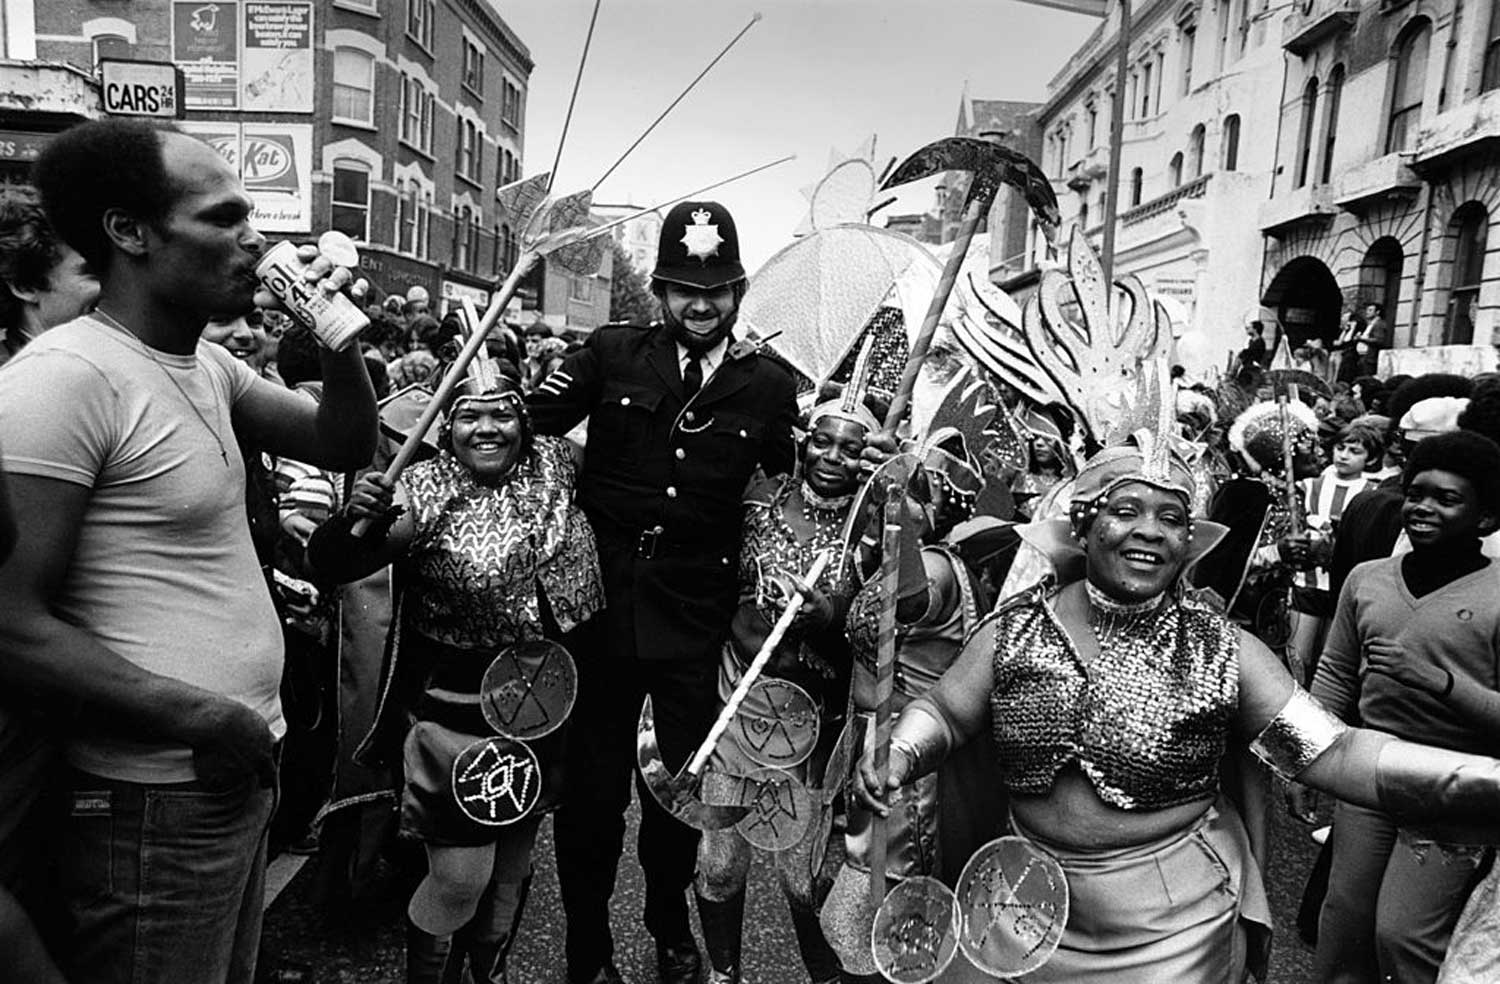 https://www.readingmuseum.org.uk/sites/default/files/images/Notting-Hill-Carnival---Getty-Images.jpg